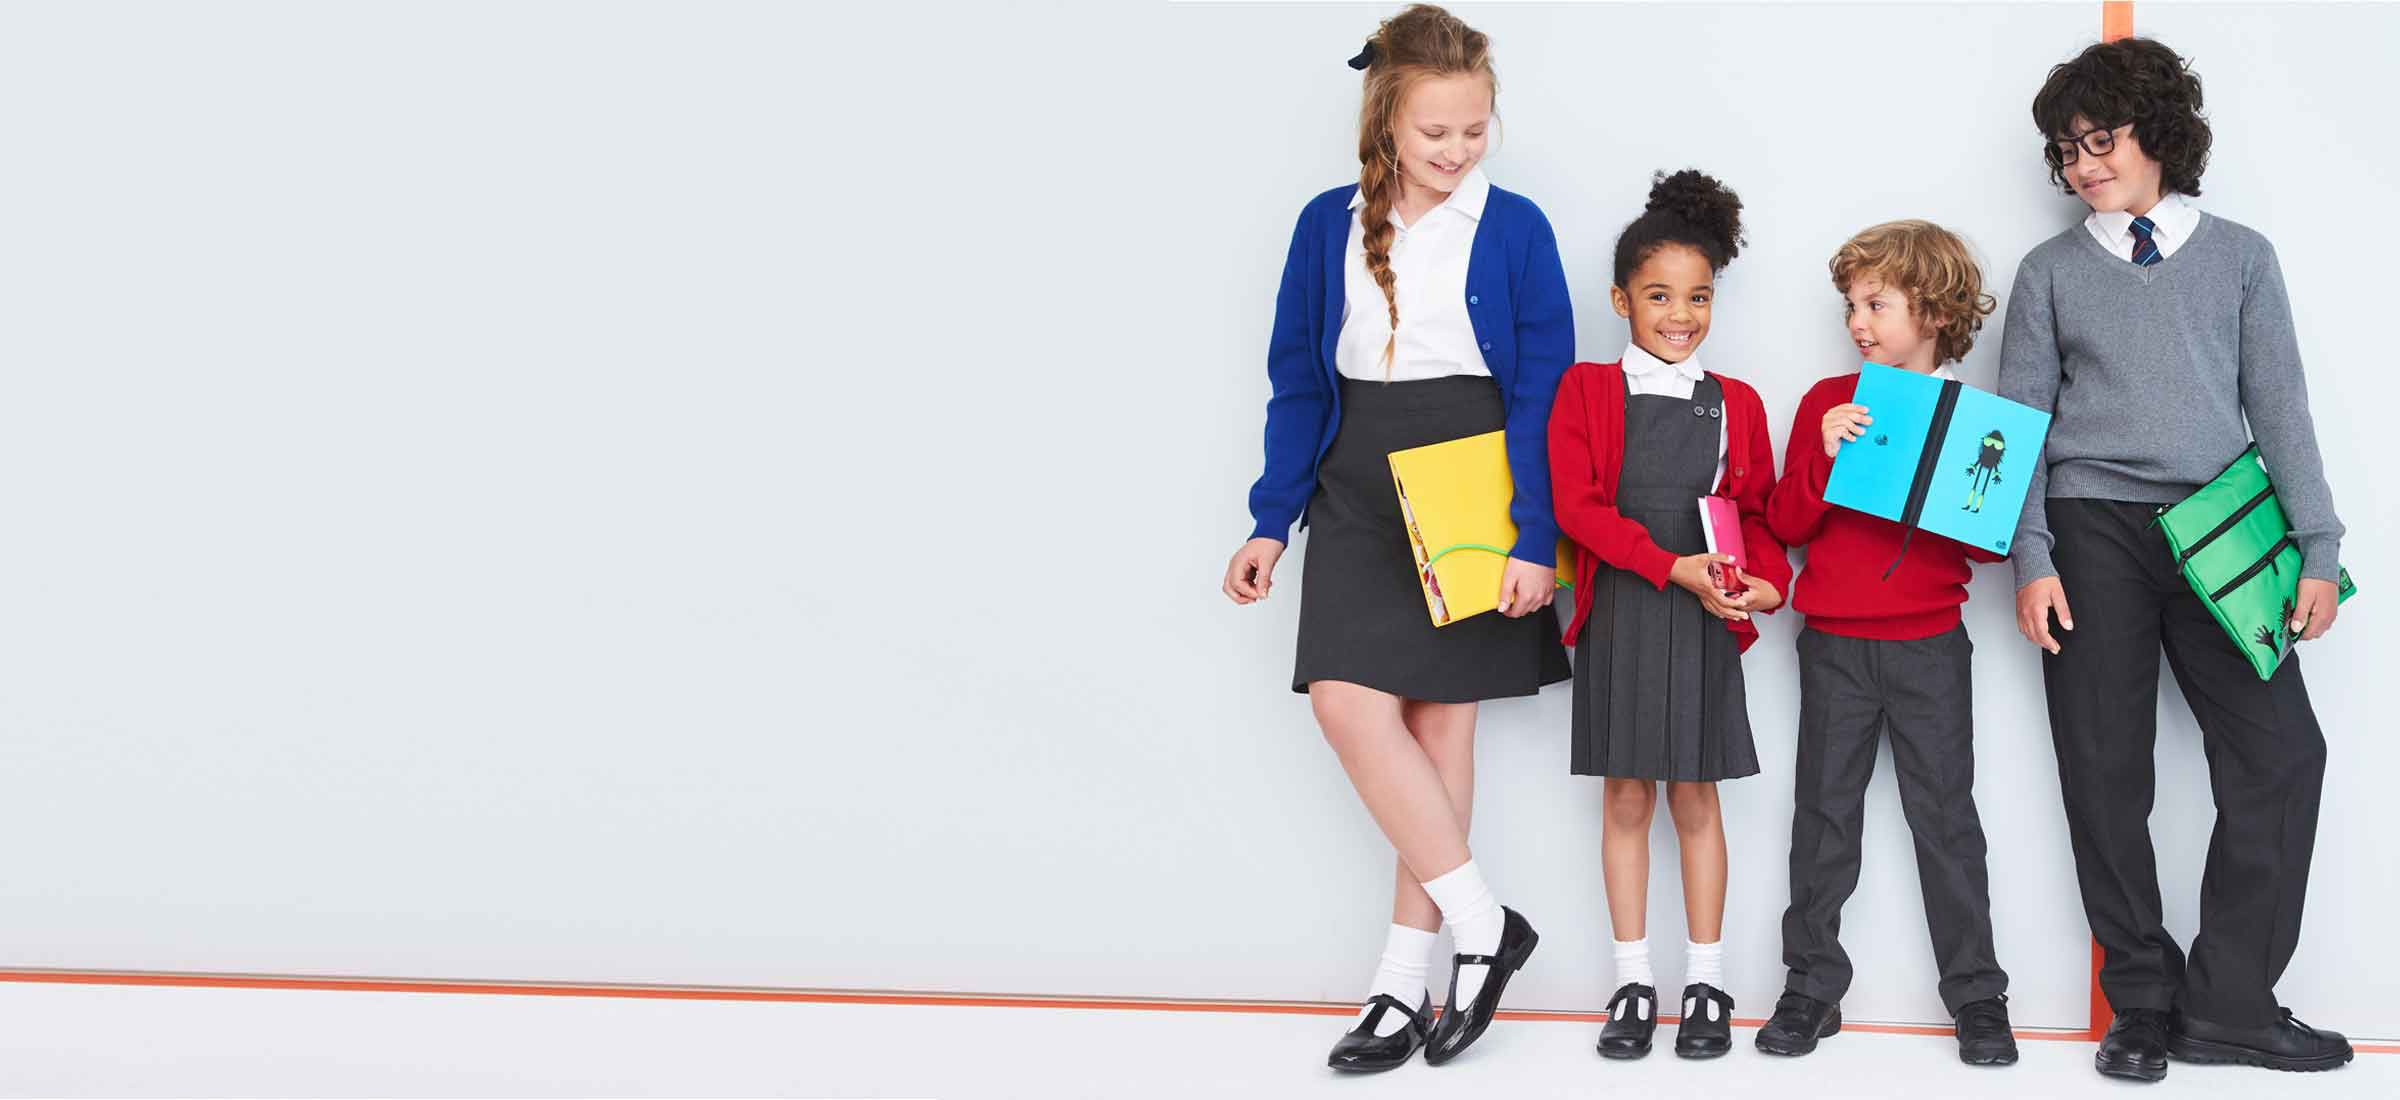 Our school uniform is market-leading thanks to the ingenious designs, extra protection on the fabrics and clever finishing touches